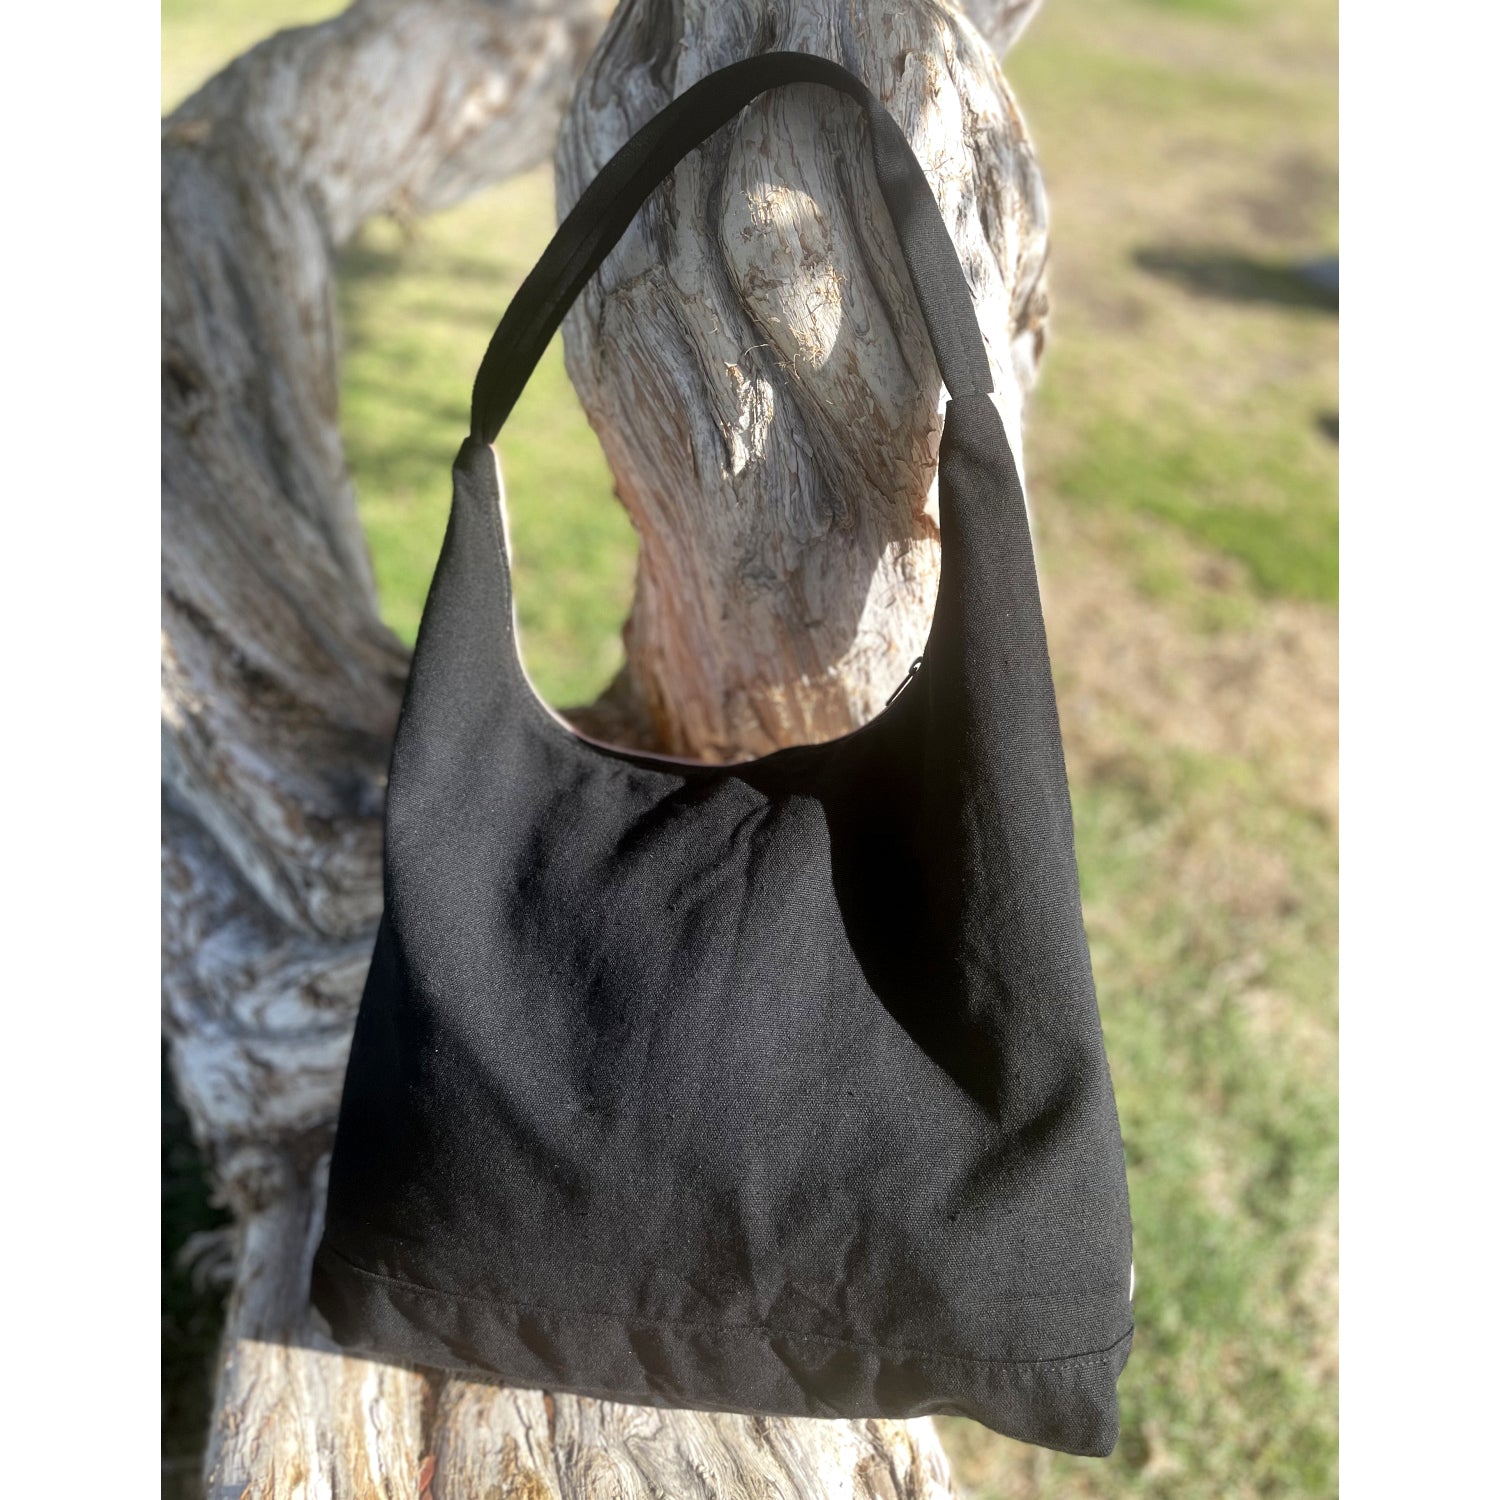 5 of 5: I Am Fabulous, Fierce and Fearless Hobo Shoulder Bag by GBaby (Back)